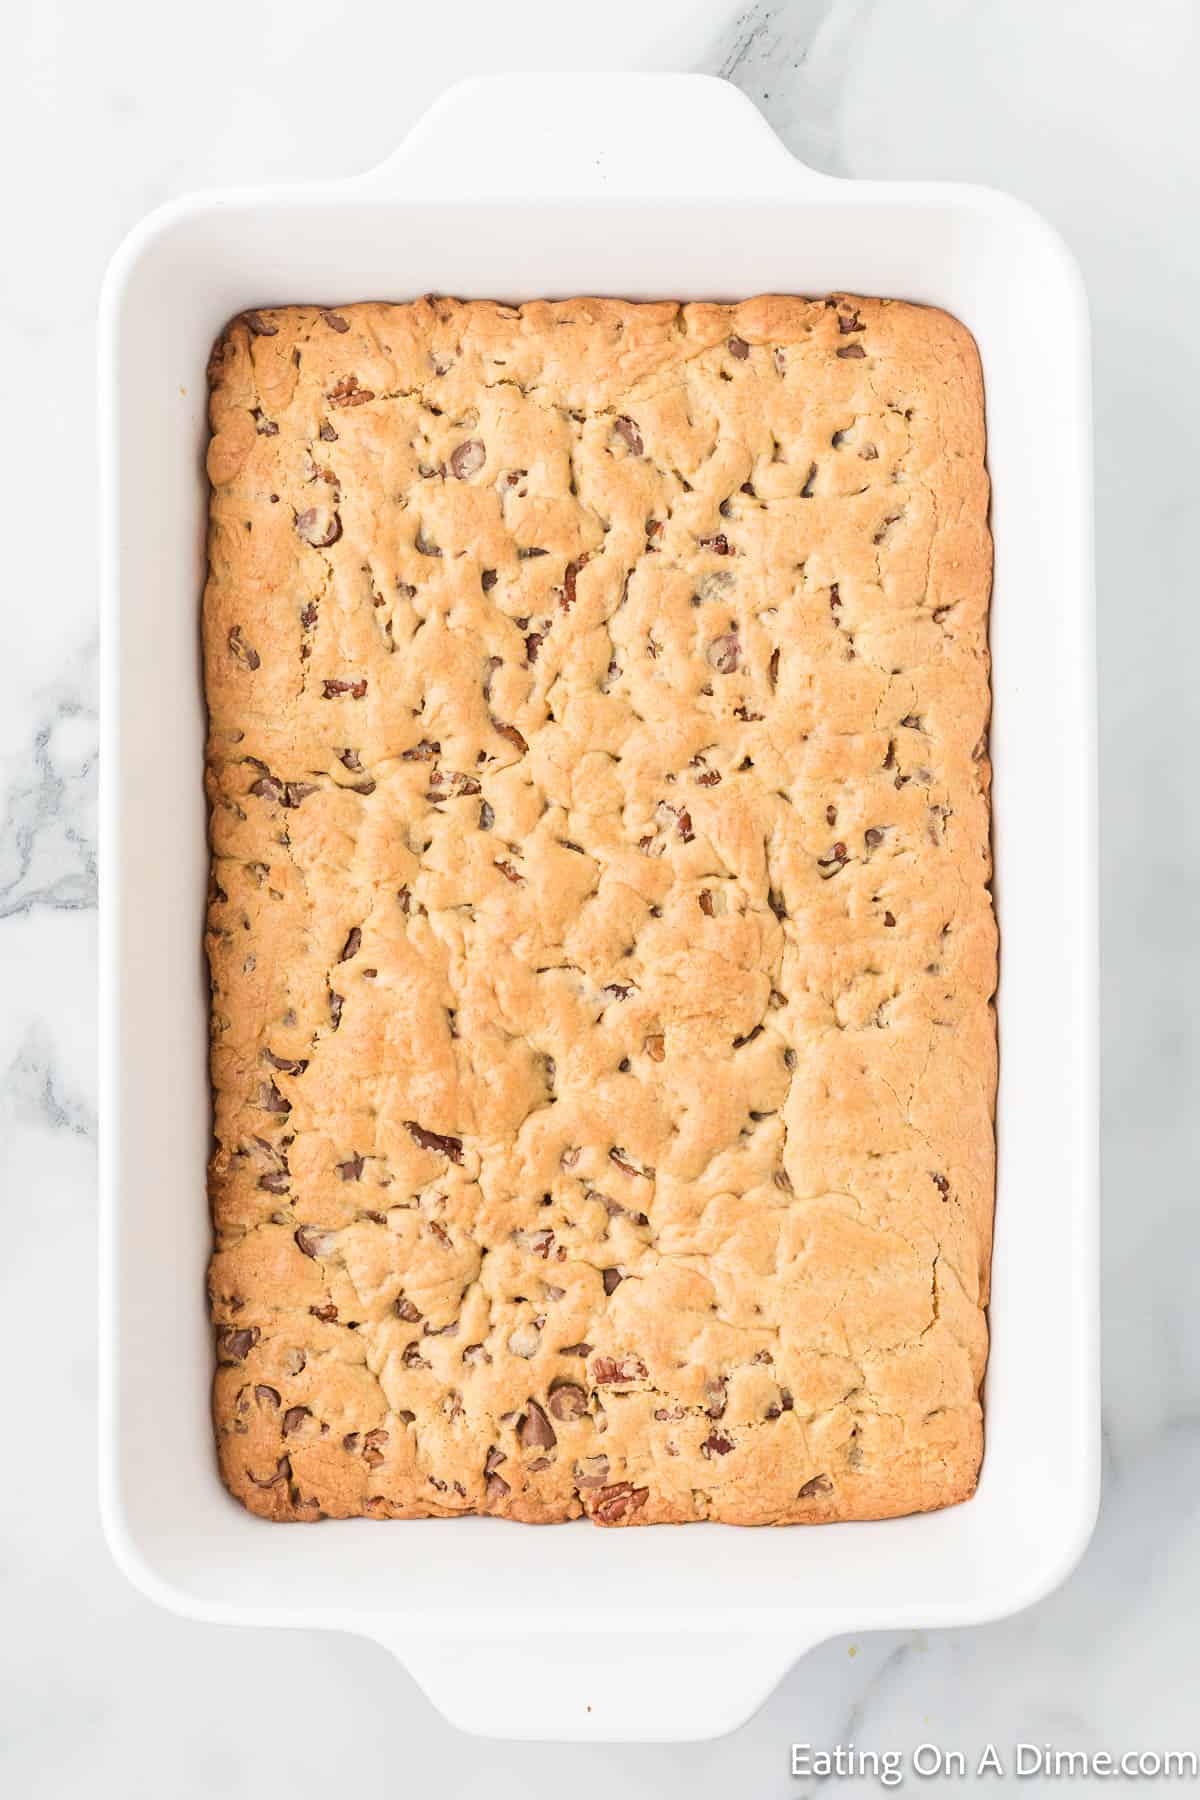 A rectangular white baking dish with baked cookie bars, featuring a golden-brown surface speckled with melted chocolate chips, embodies the quintessential Chocolate Chip Cookie Cake Recipe. The dish is placed on a light marble countertop.